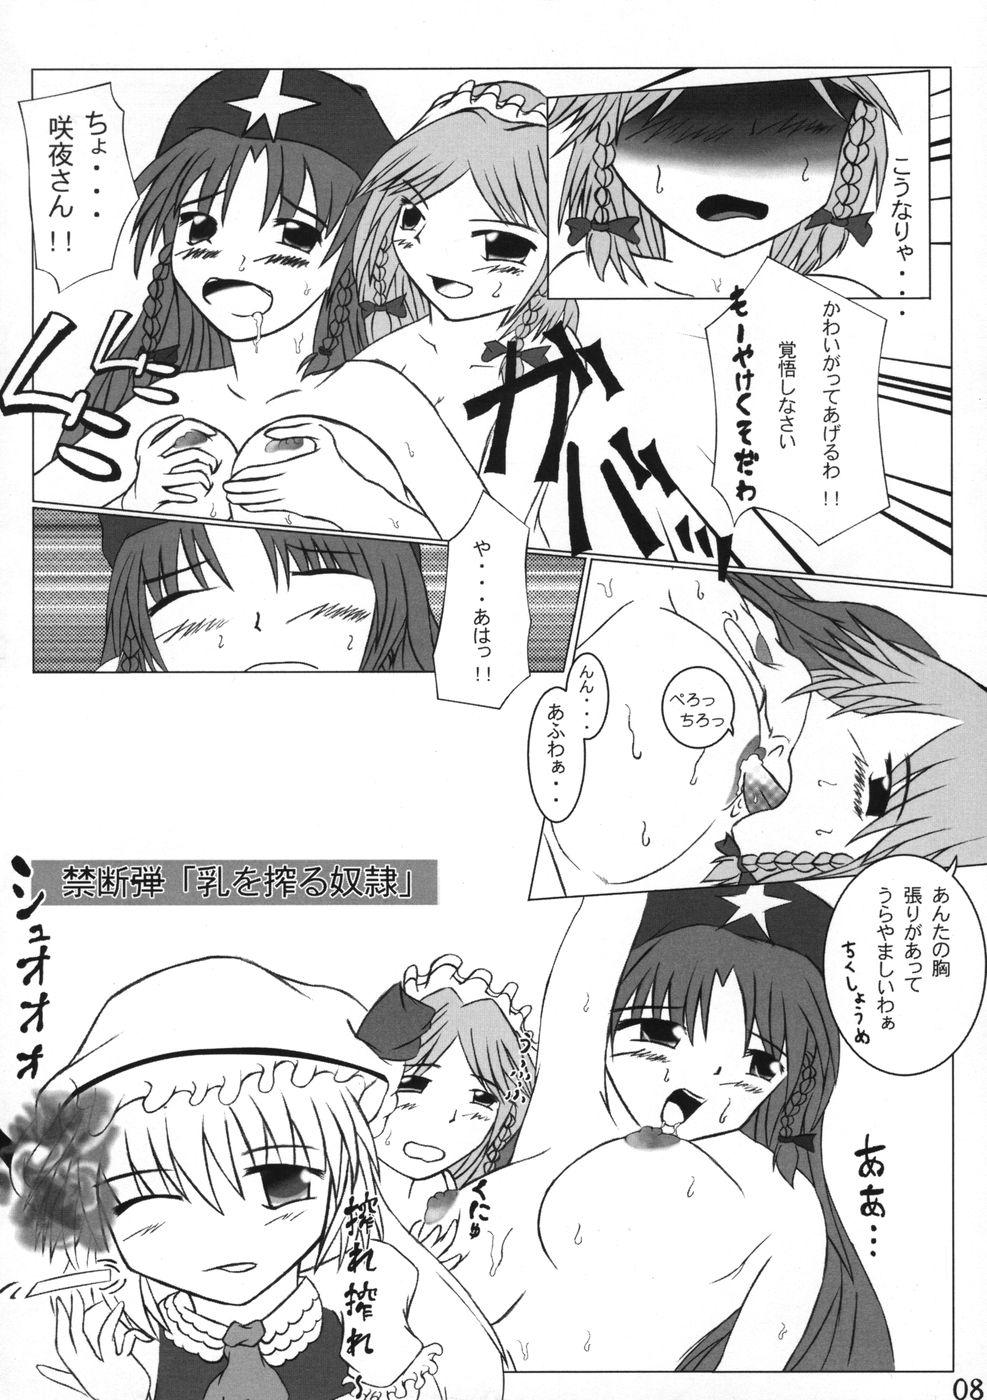 Flagra 業創りし風 - Touhou project Lolicon - Page 8